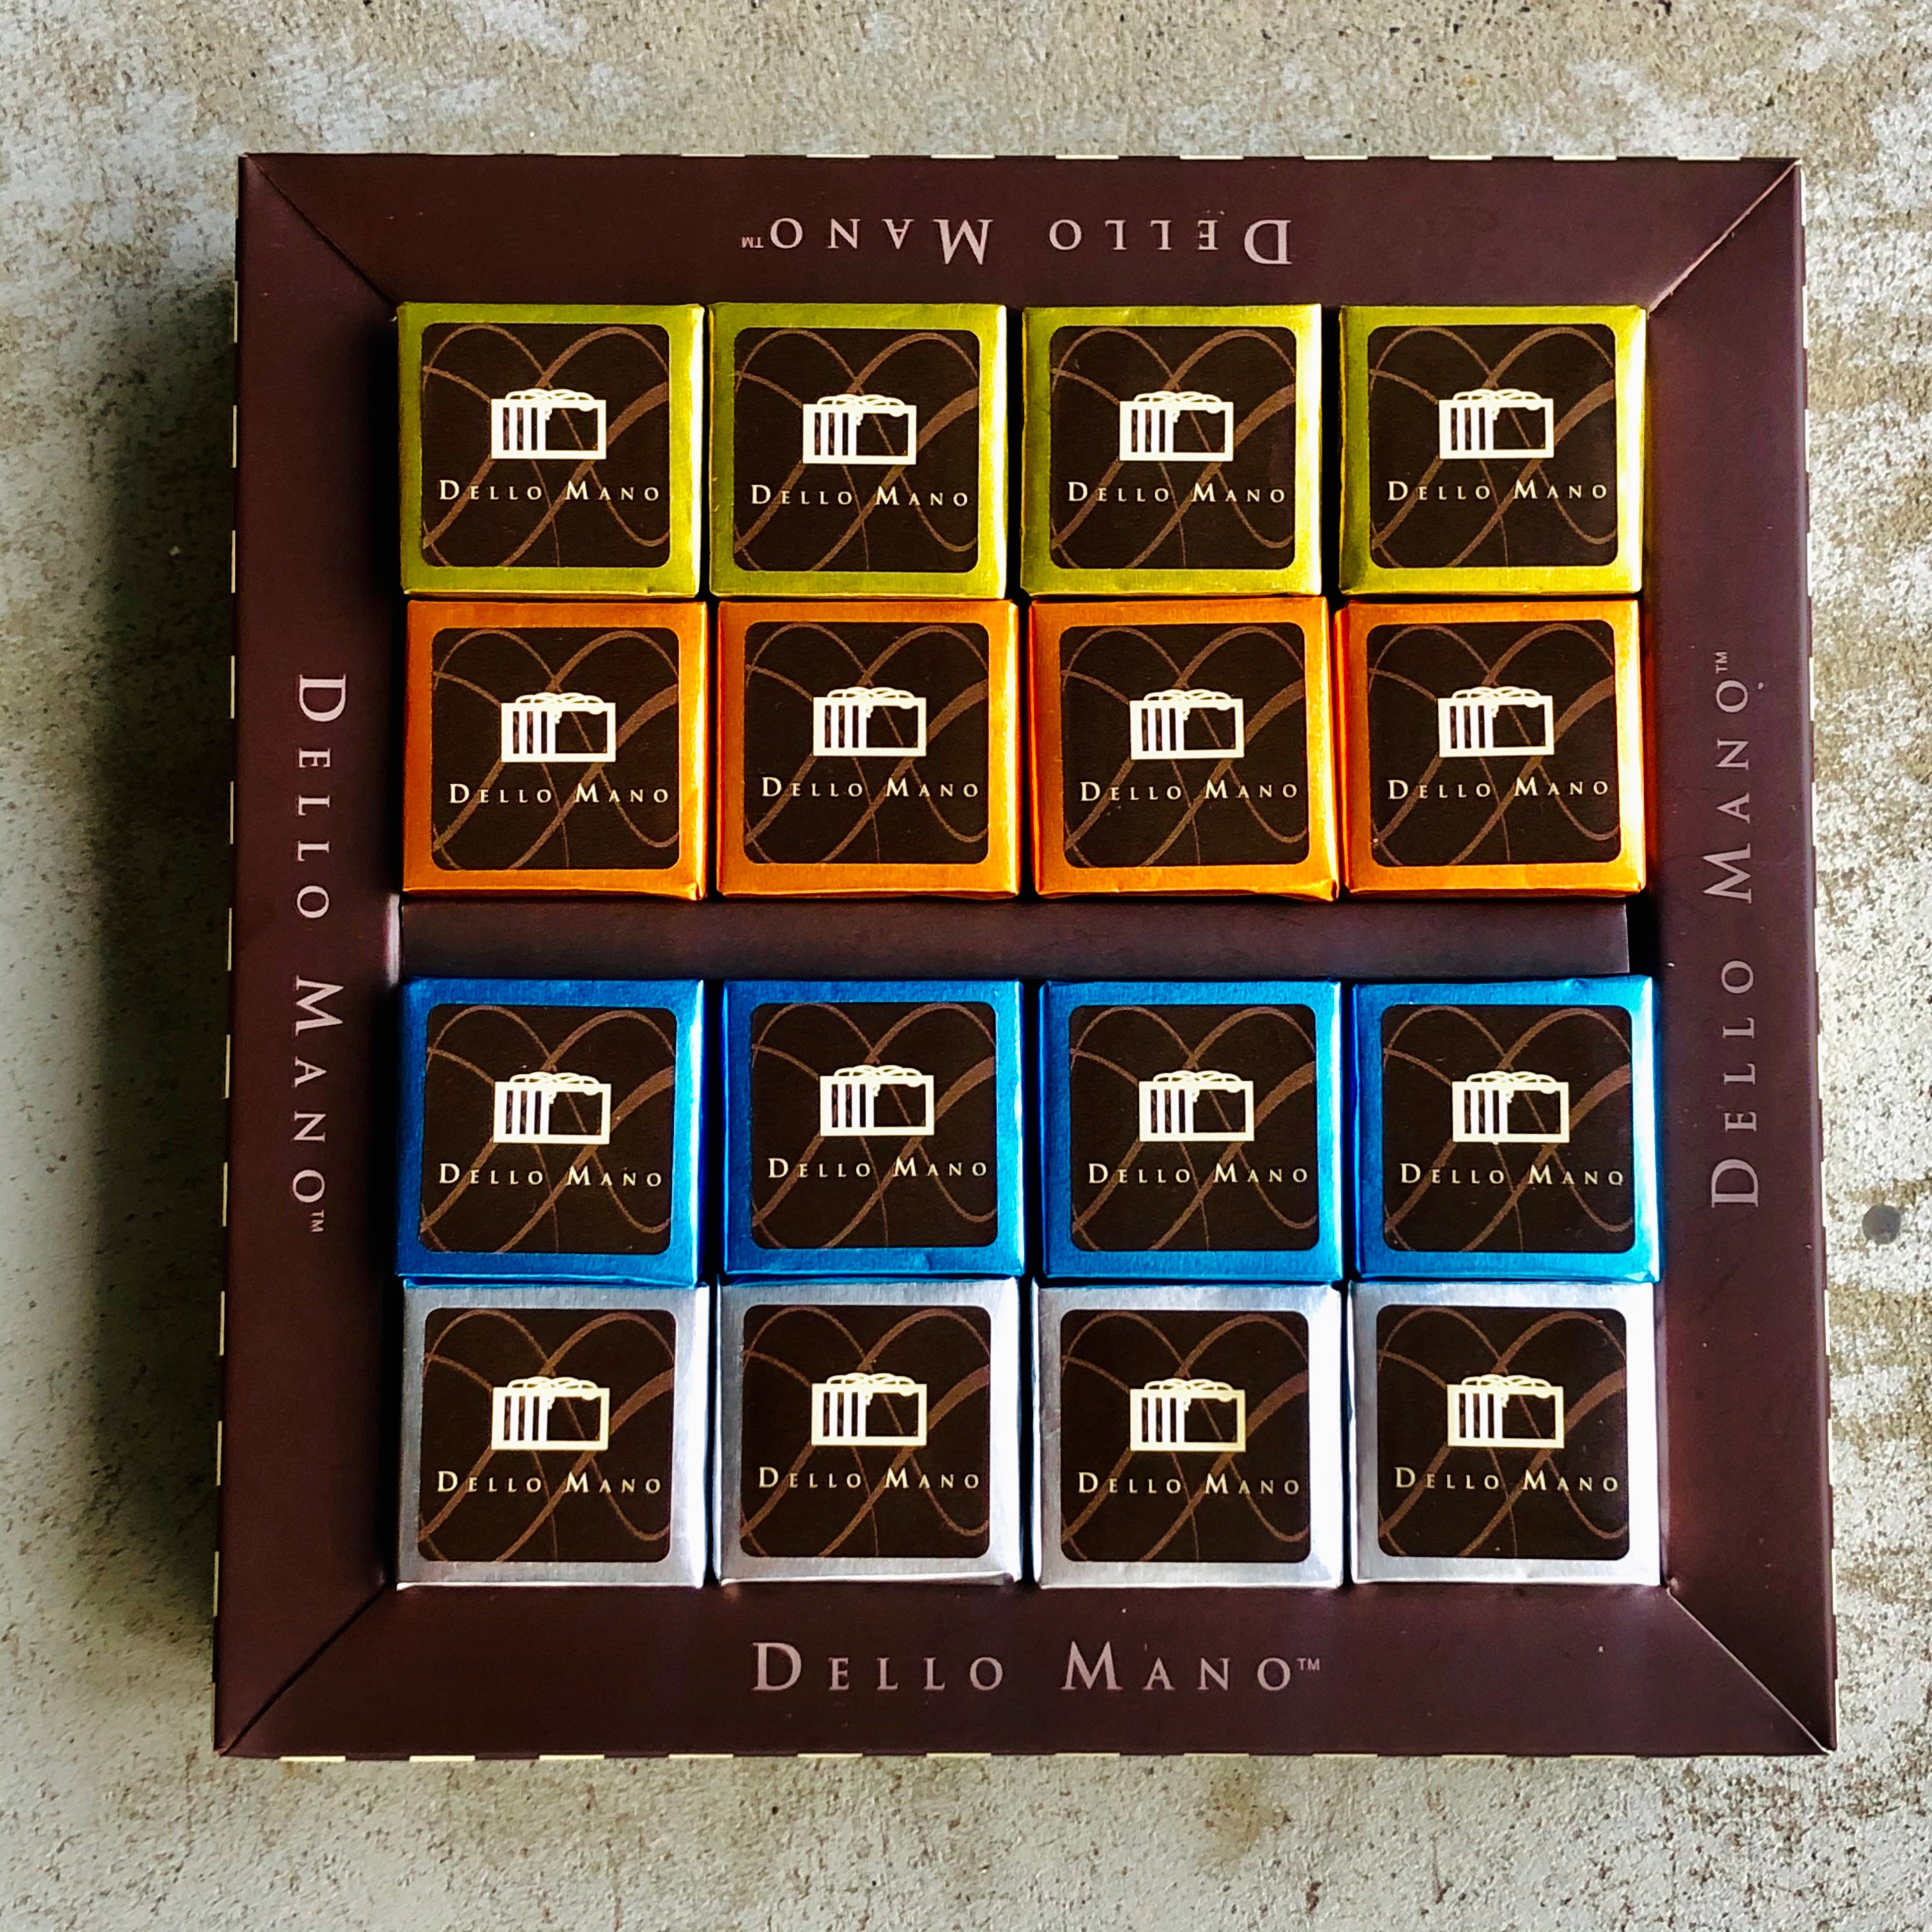 Four brownies of each colour gold, orange, blue and silver nestled into a chocolate gift box that has the words Dello Mano printed